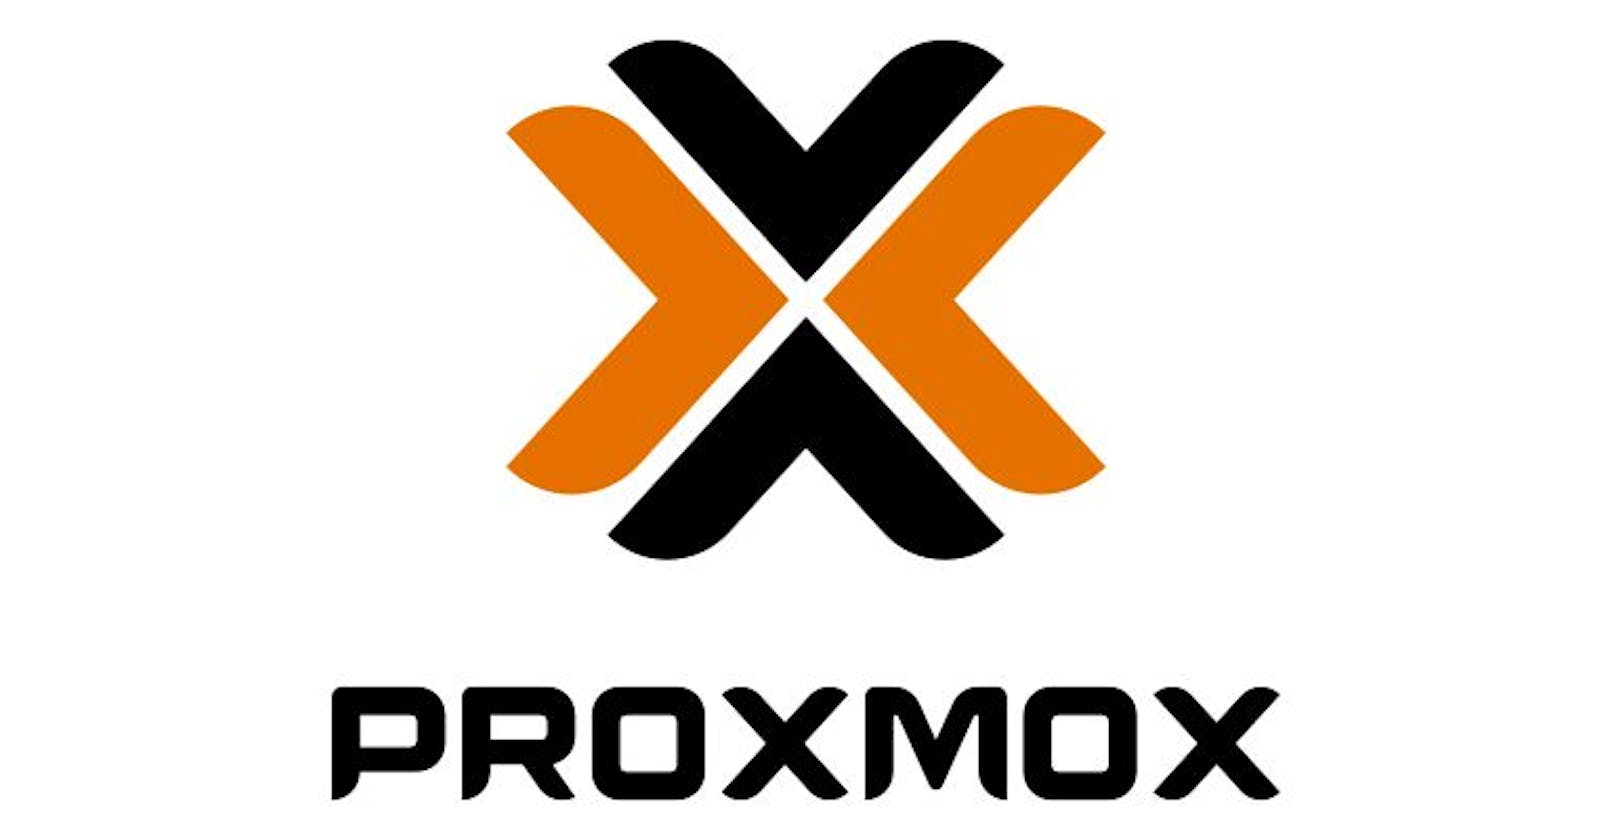 Proxmox: Empowering Virtualization and Containerization